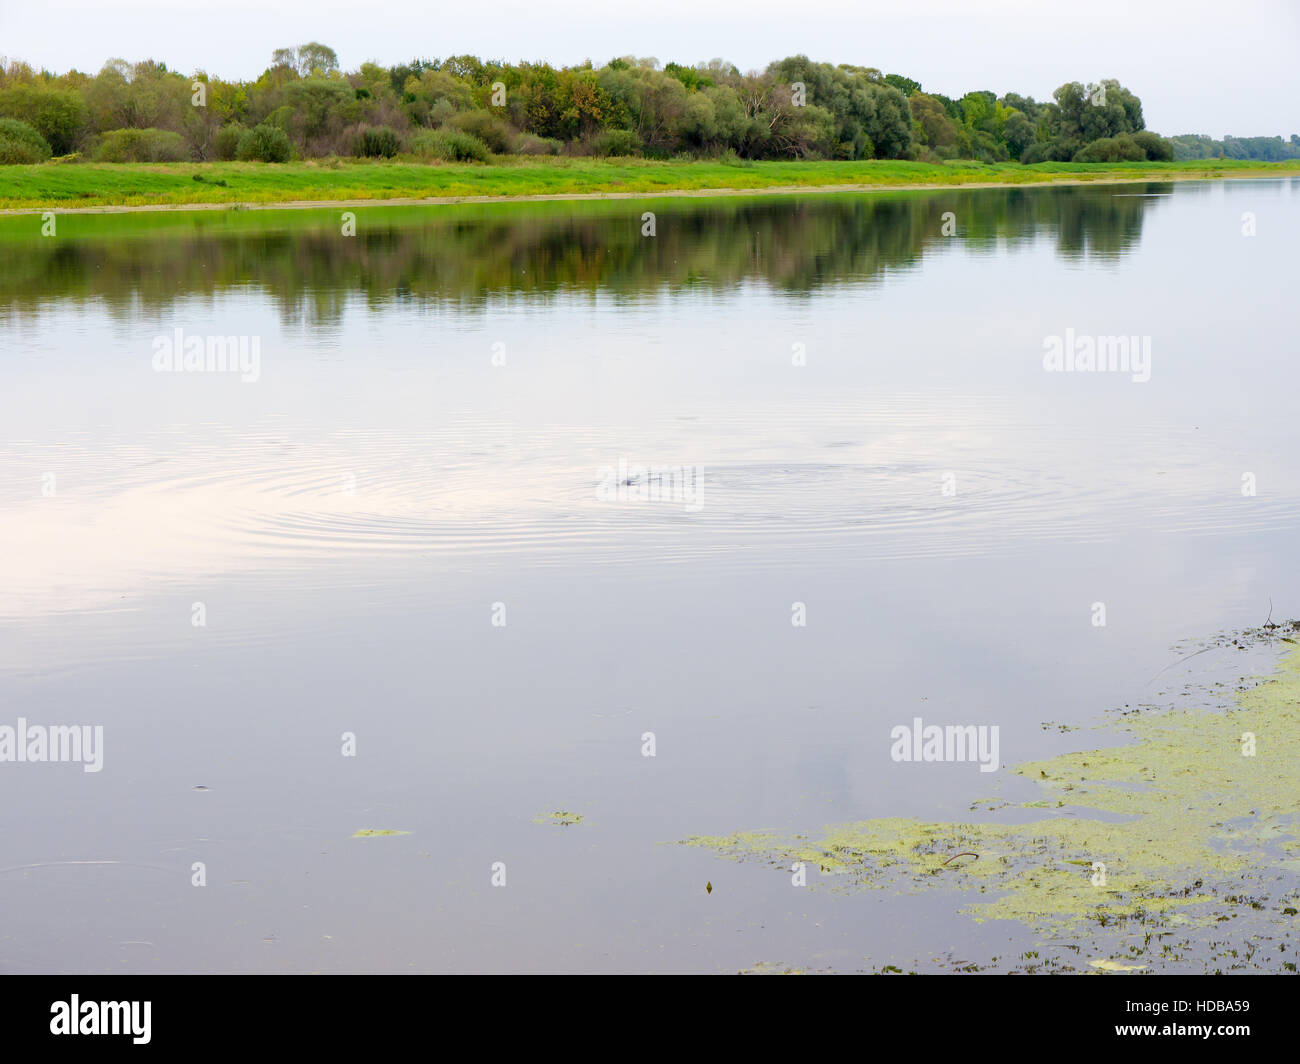 Landscape river in the forests and fields. Stock Photo